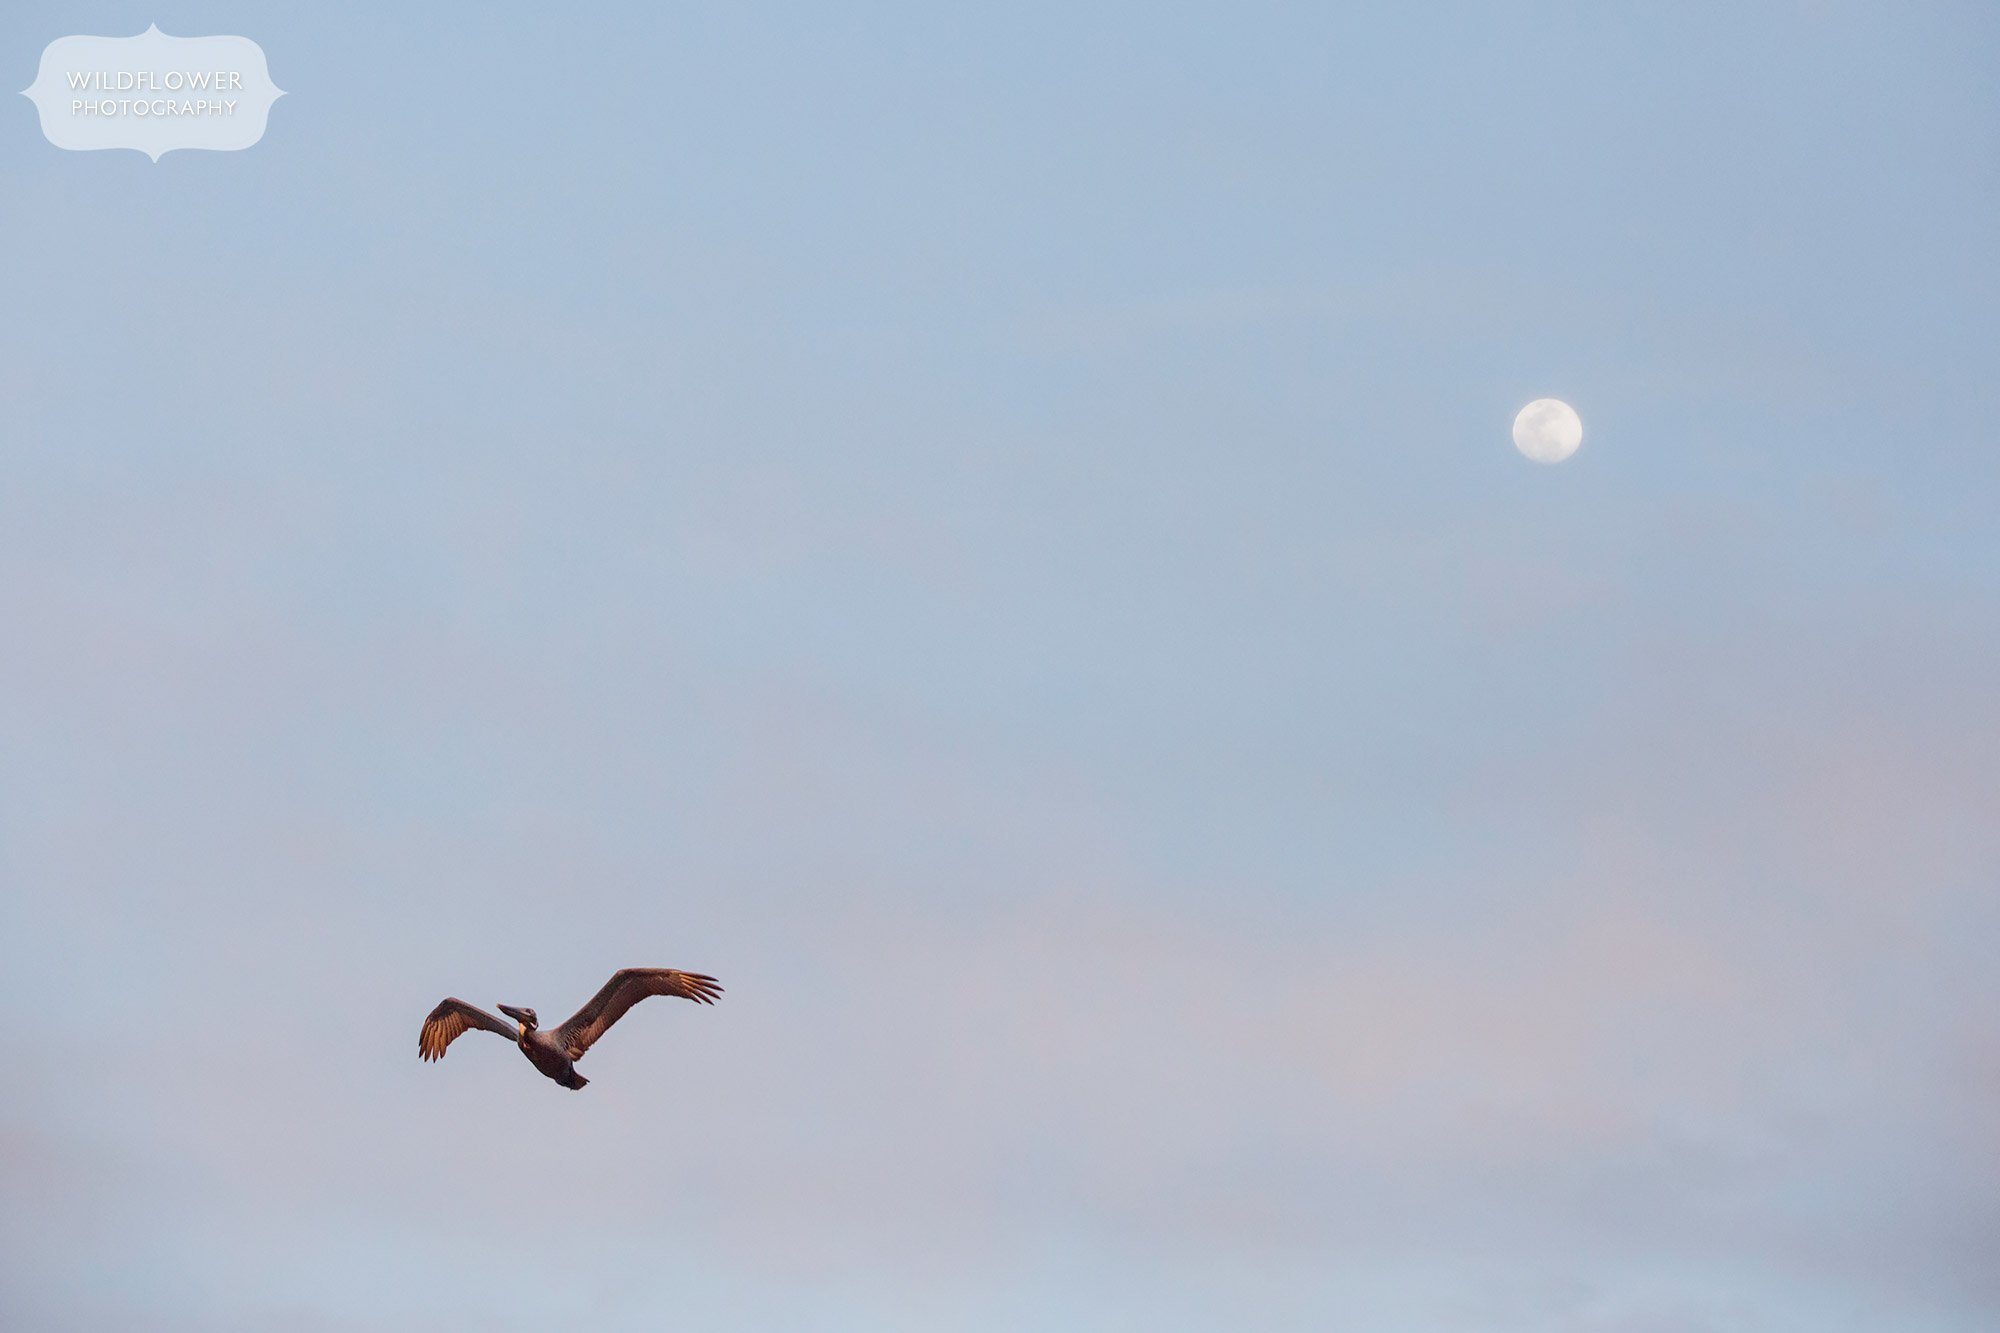 A brown pelican flies in front of a full moon on St. George Island in Florida.